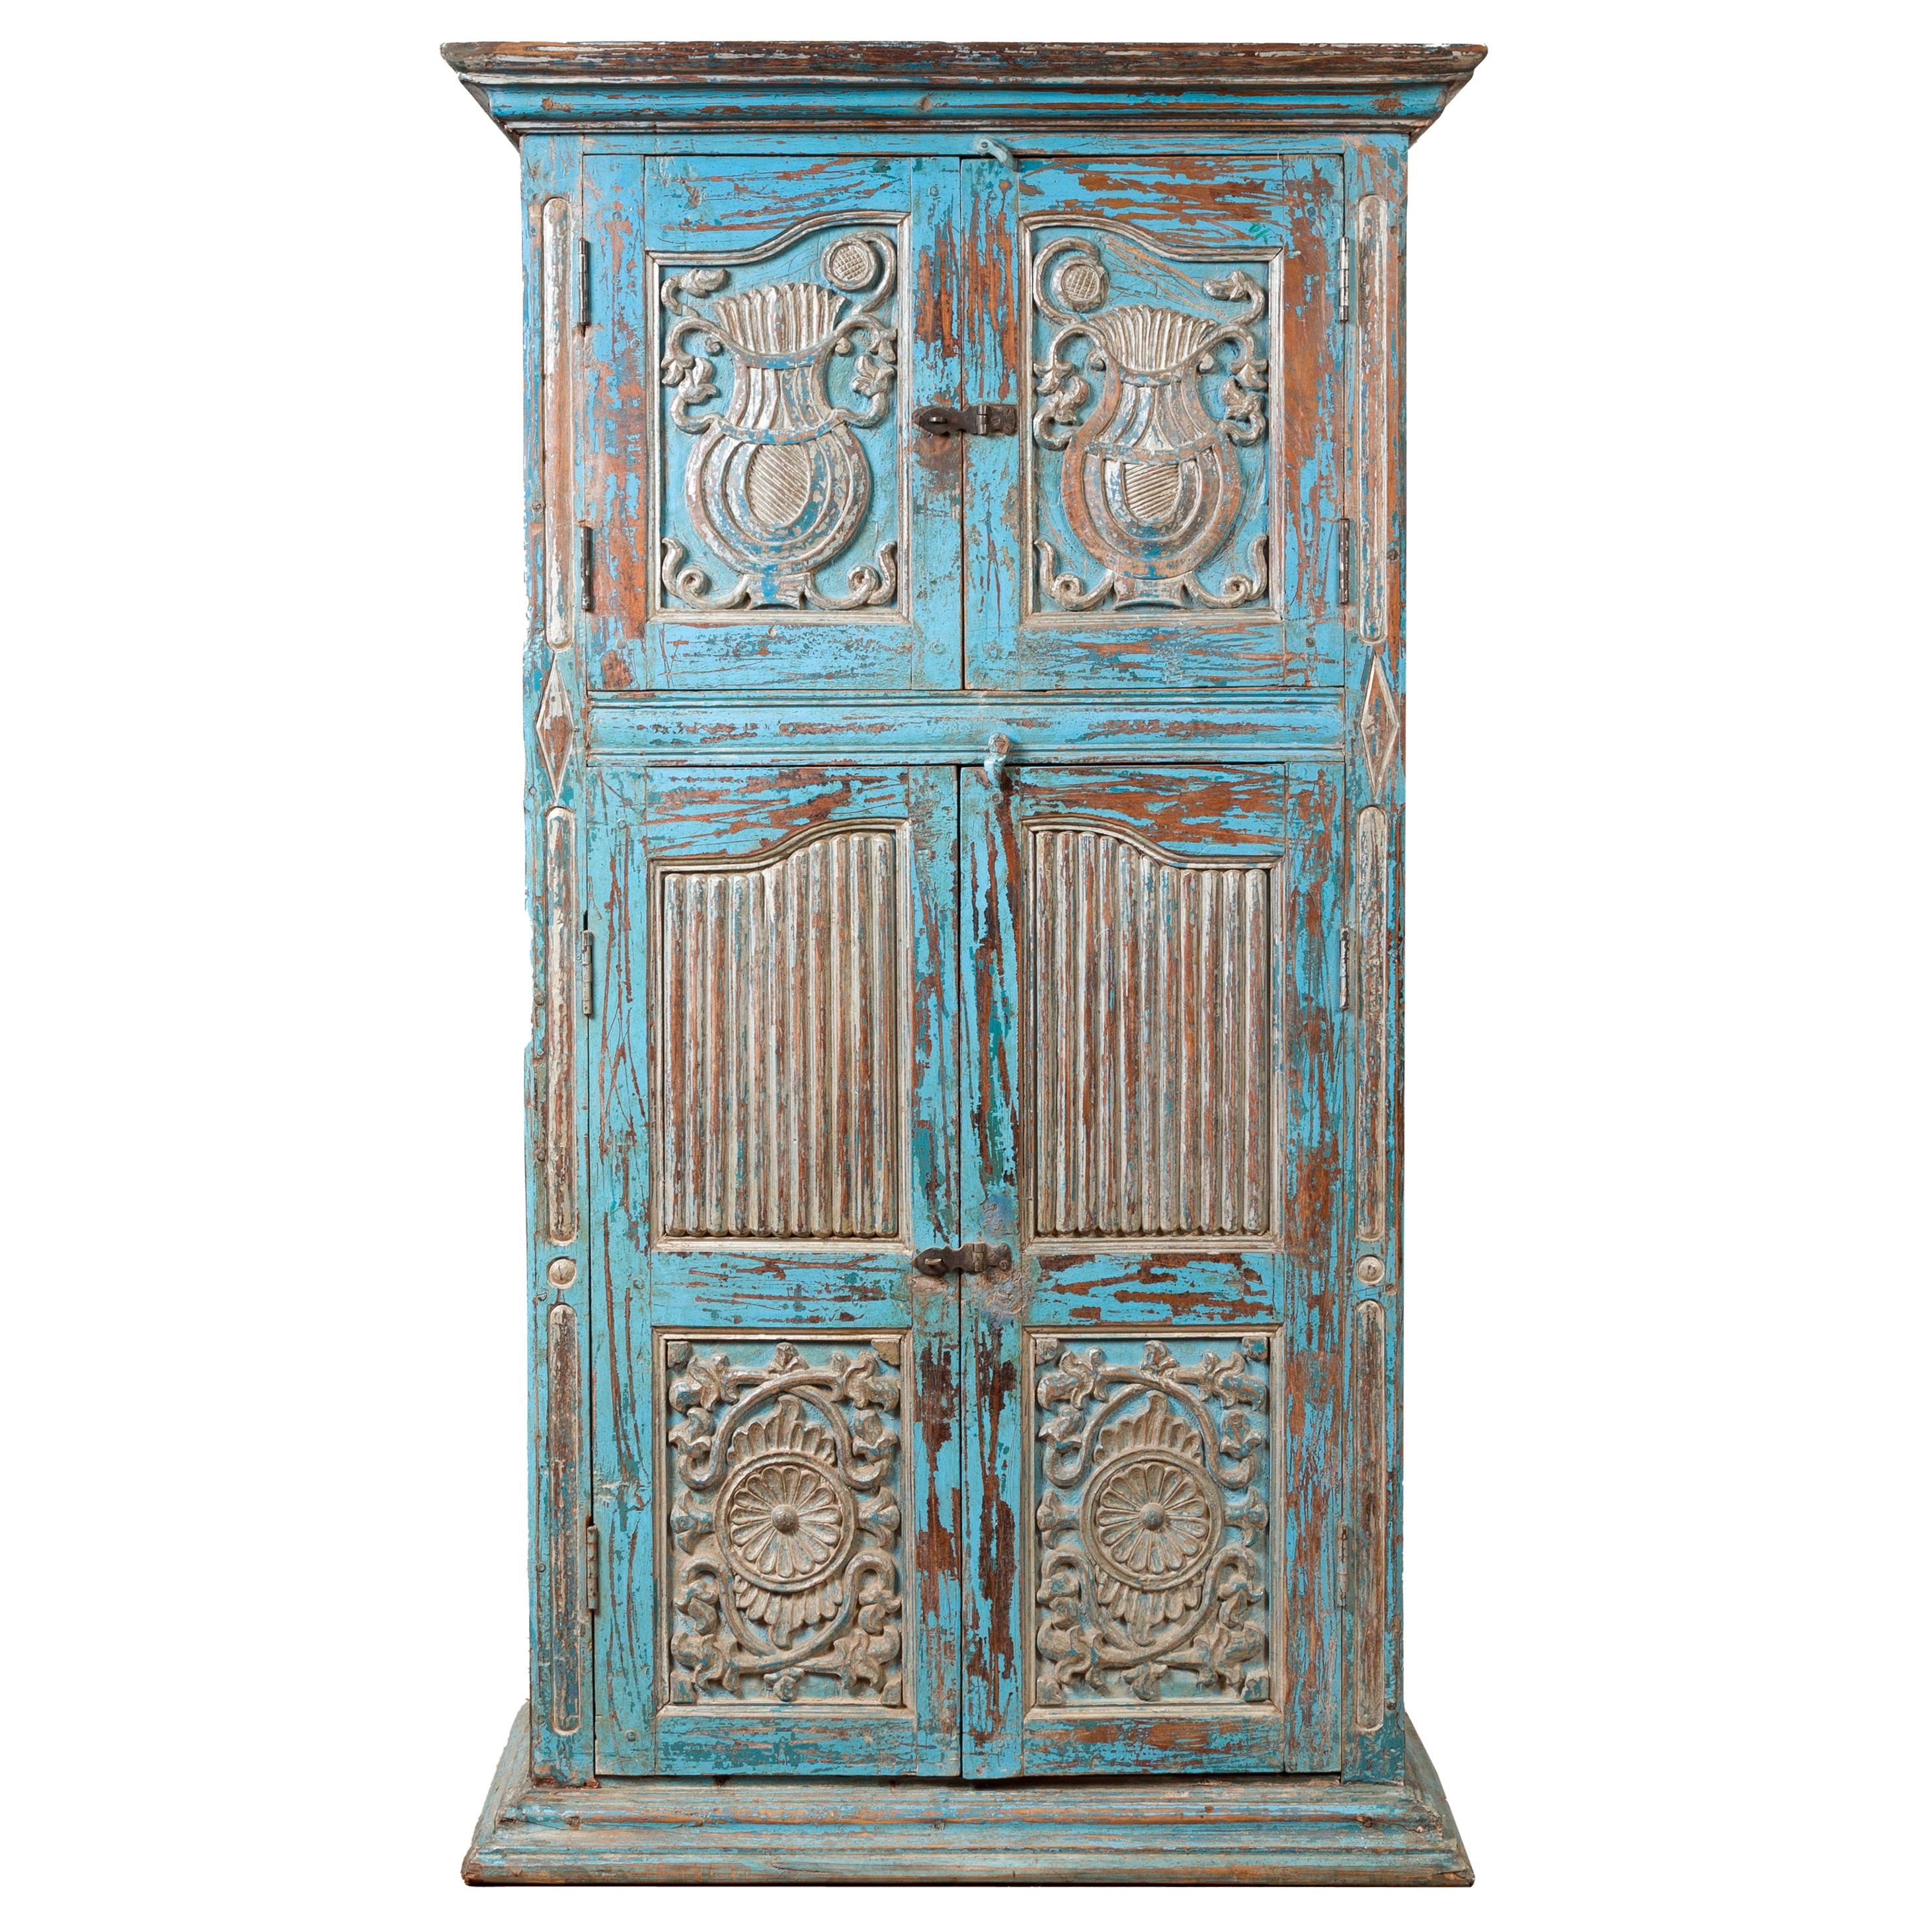 Antique Indian Distressed Wooden Cabinet with Hand Rubbed Blue Patina